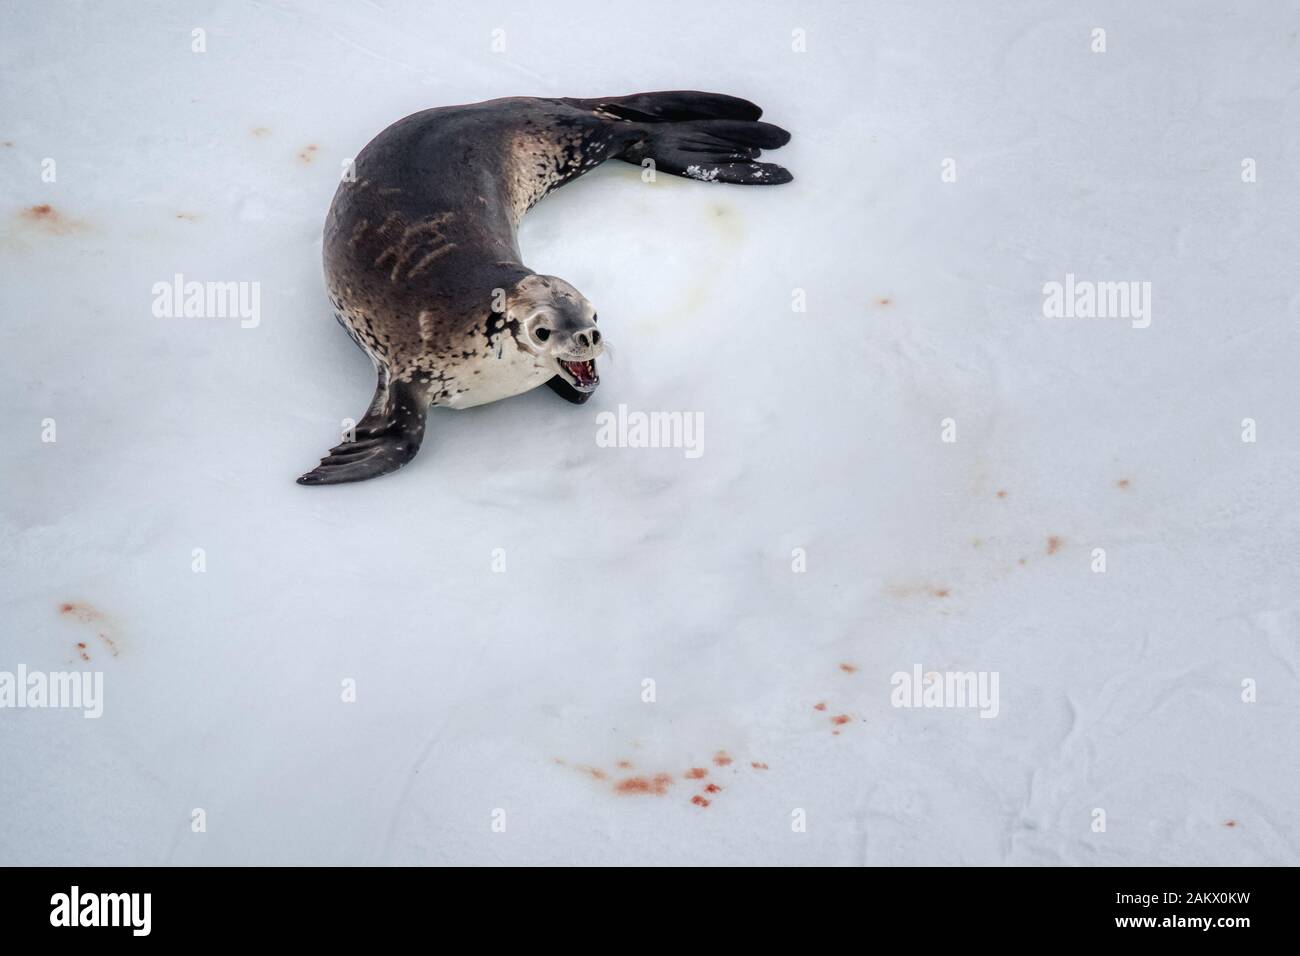 The seal on the ice, viewed from high angle with copy space. Wild animal life of Antarctica nature picture Stock Photo